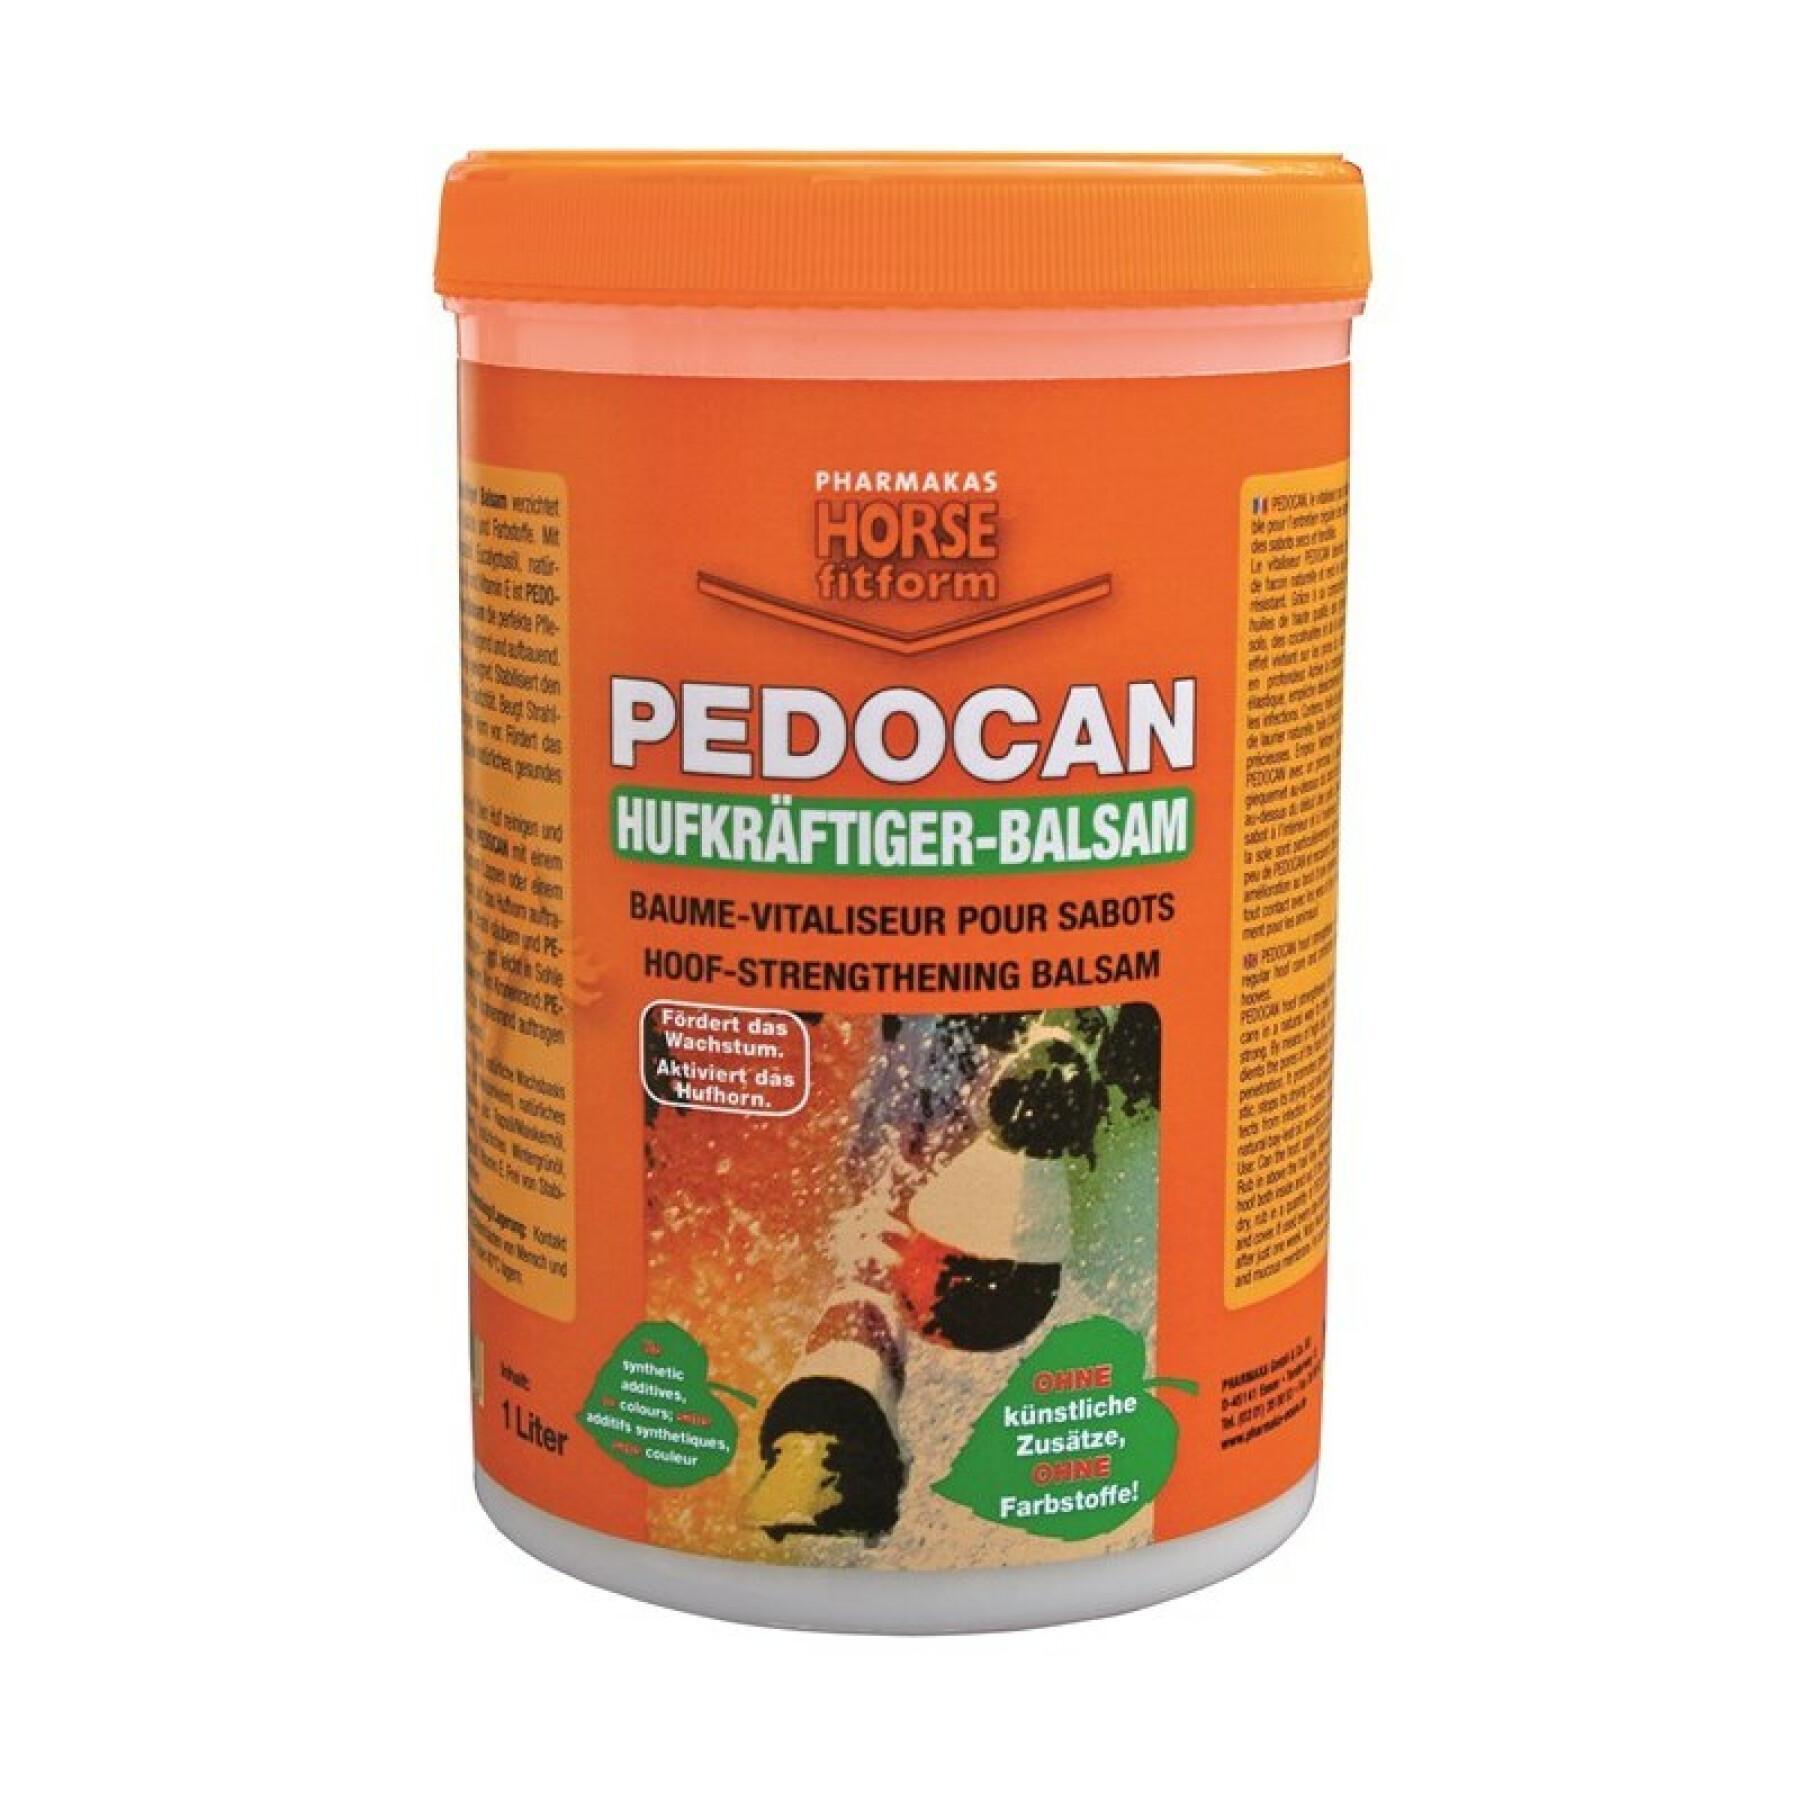 Huile sabot pour cheval Pharmaka Pedocan 2,5l